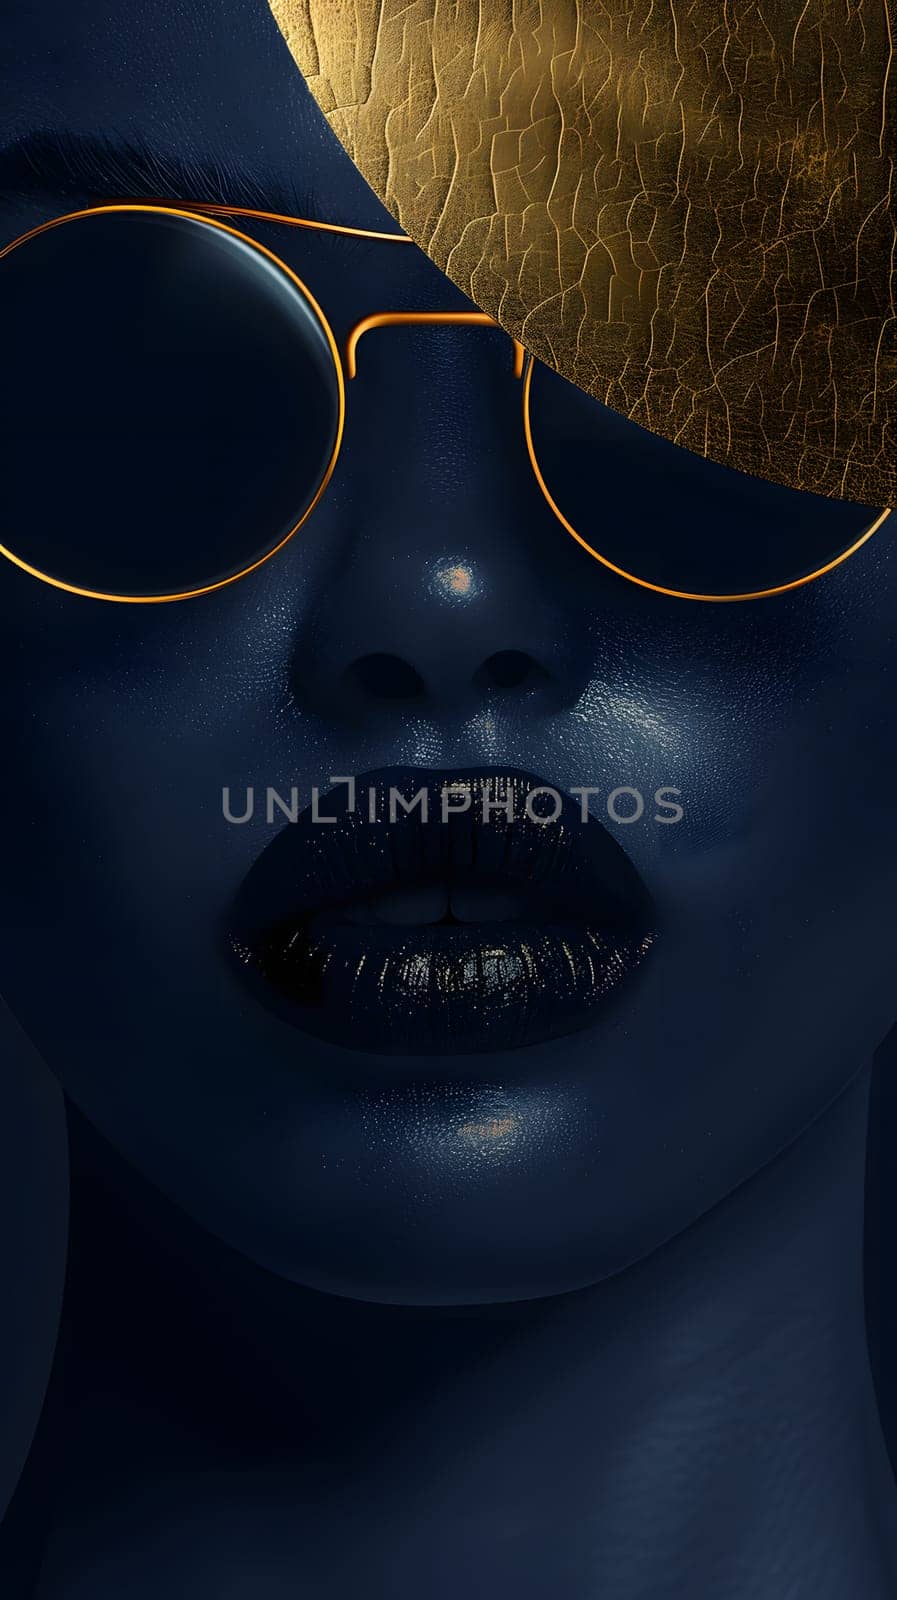 A close up of a womans face with electric blue glasses and black lips, showcasing trendy eyewear and eye glass accessory style